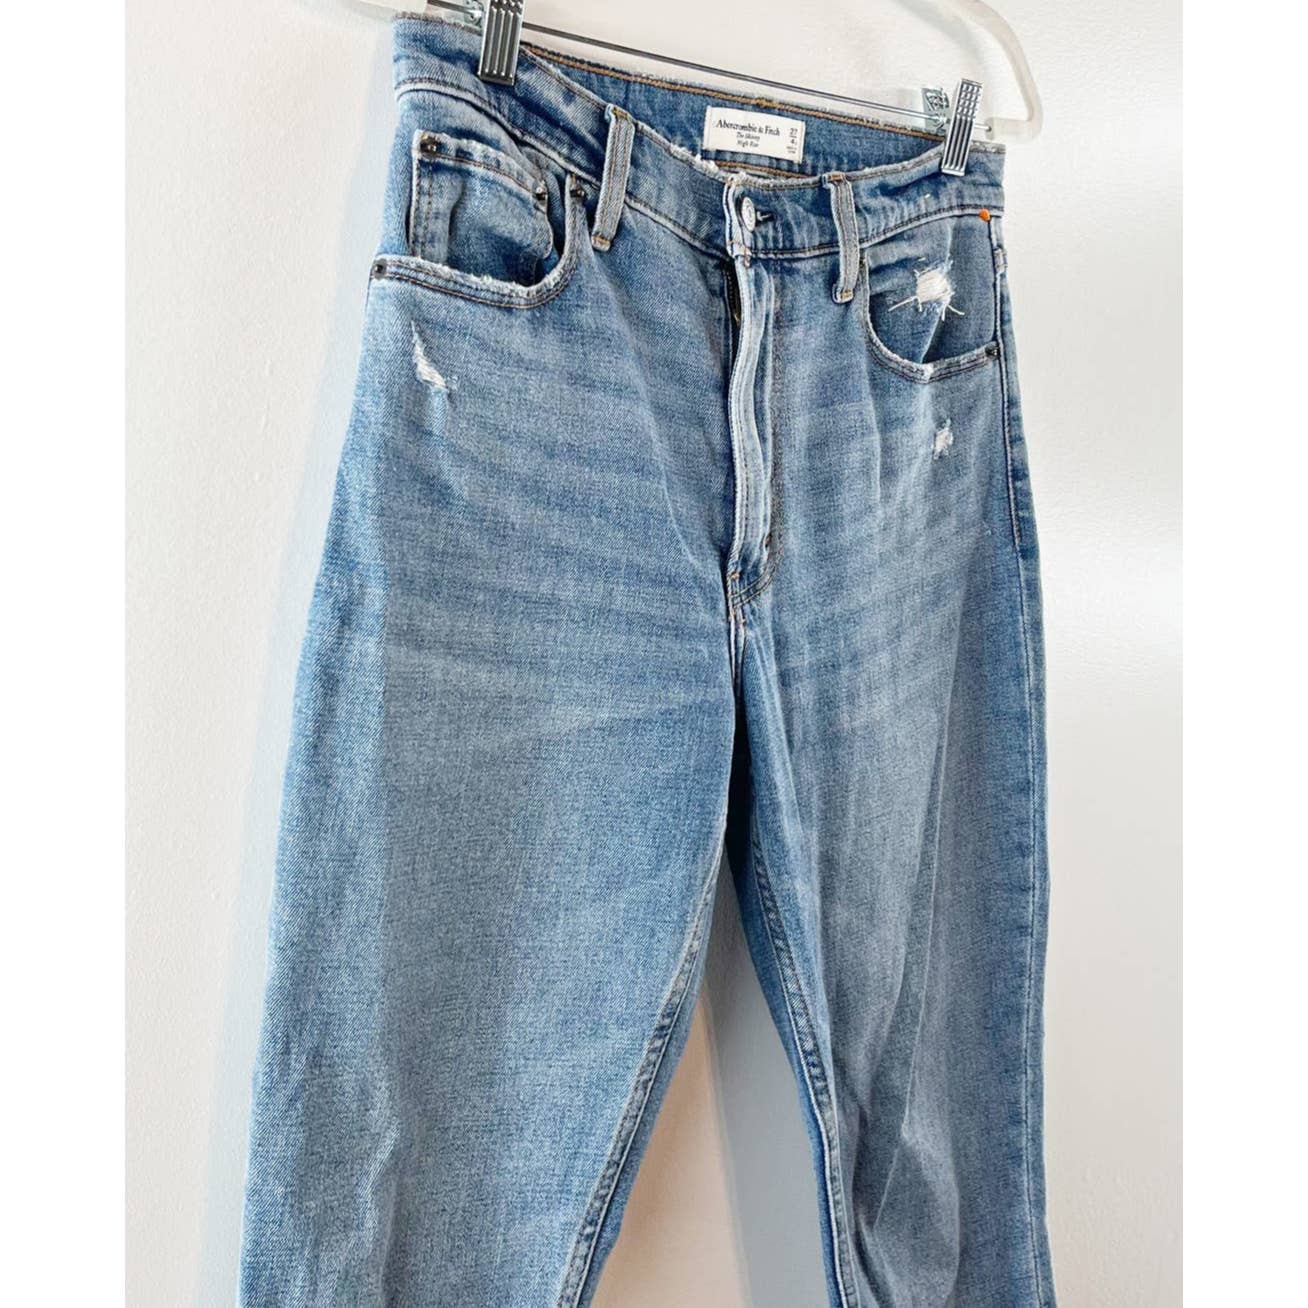 Abercrombie & Fitch The High Rise Skinny Denim High Rise Jeans Blue 27 X Short